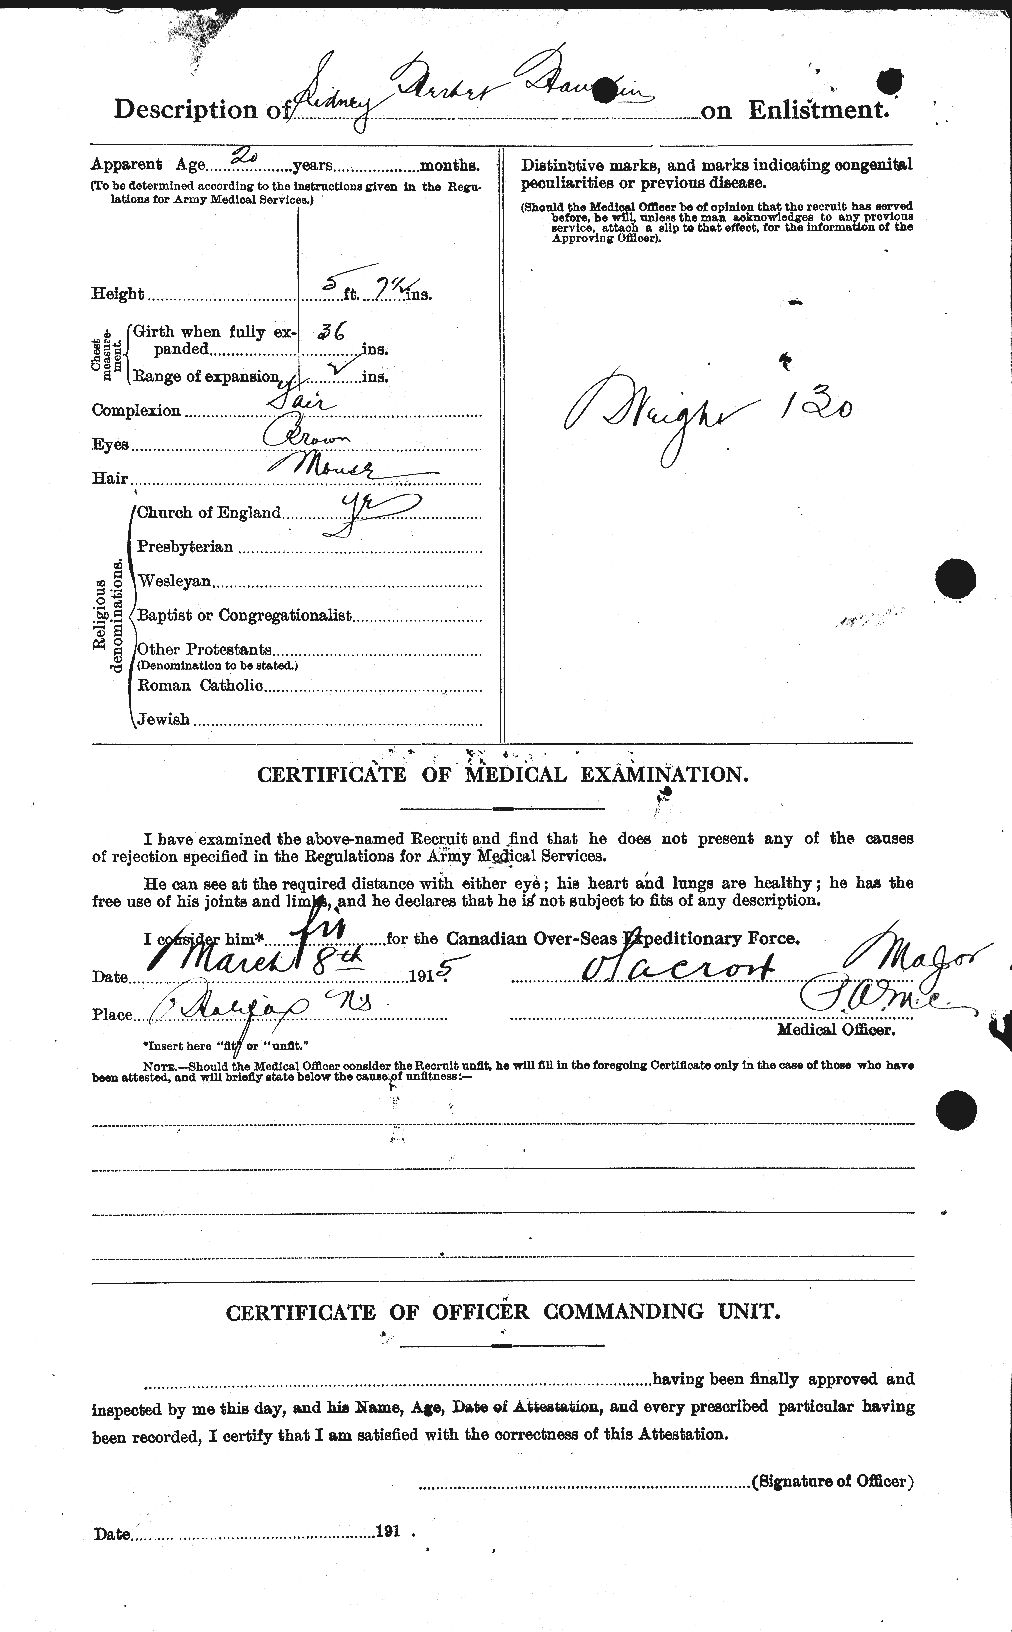 Personnel Records of the First World War - CEF 385608b